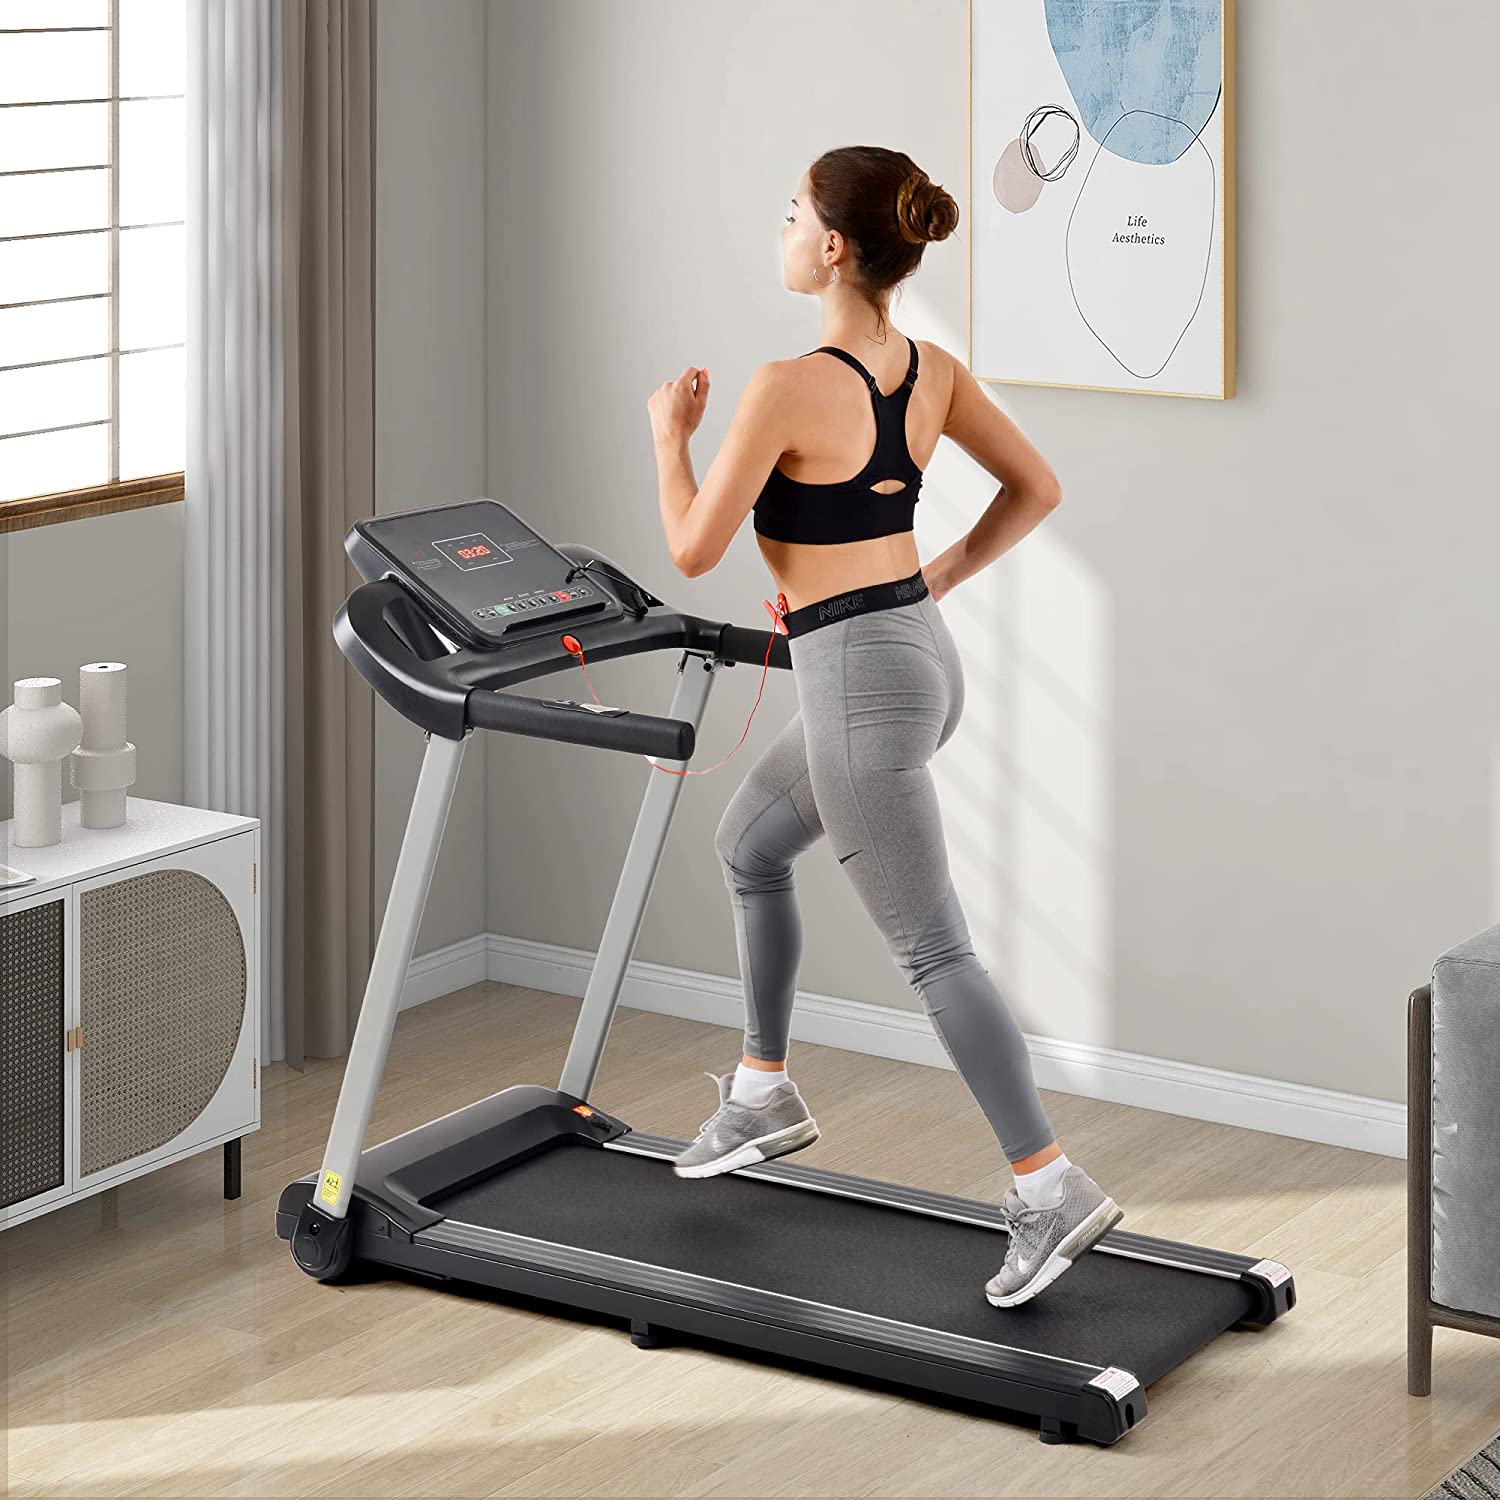 Merax Motorized Treadmill for Home, 2.5HP Electric Treadmill for Running, Walking and Jogging Exercise with Speakers, 12 Programs, Tracking Pulse - image 2 of 8